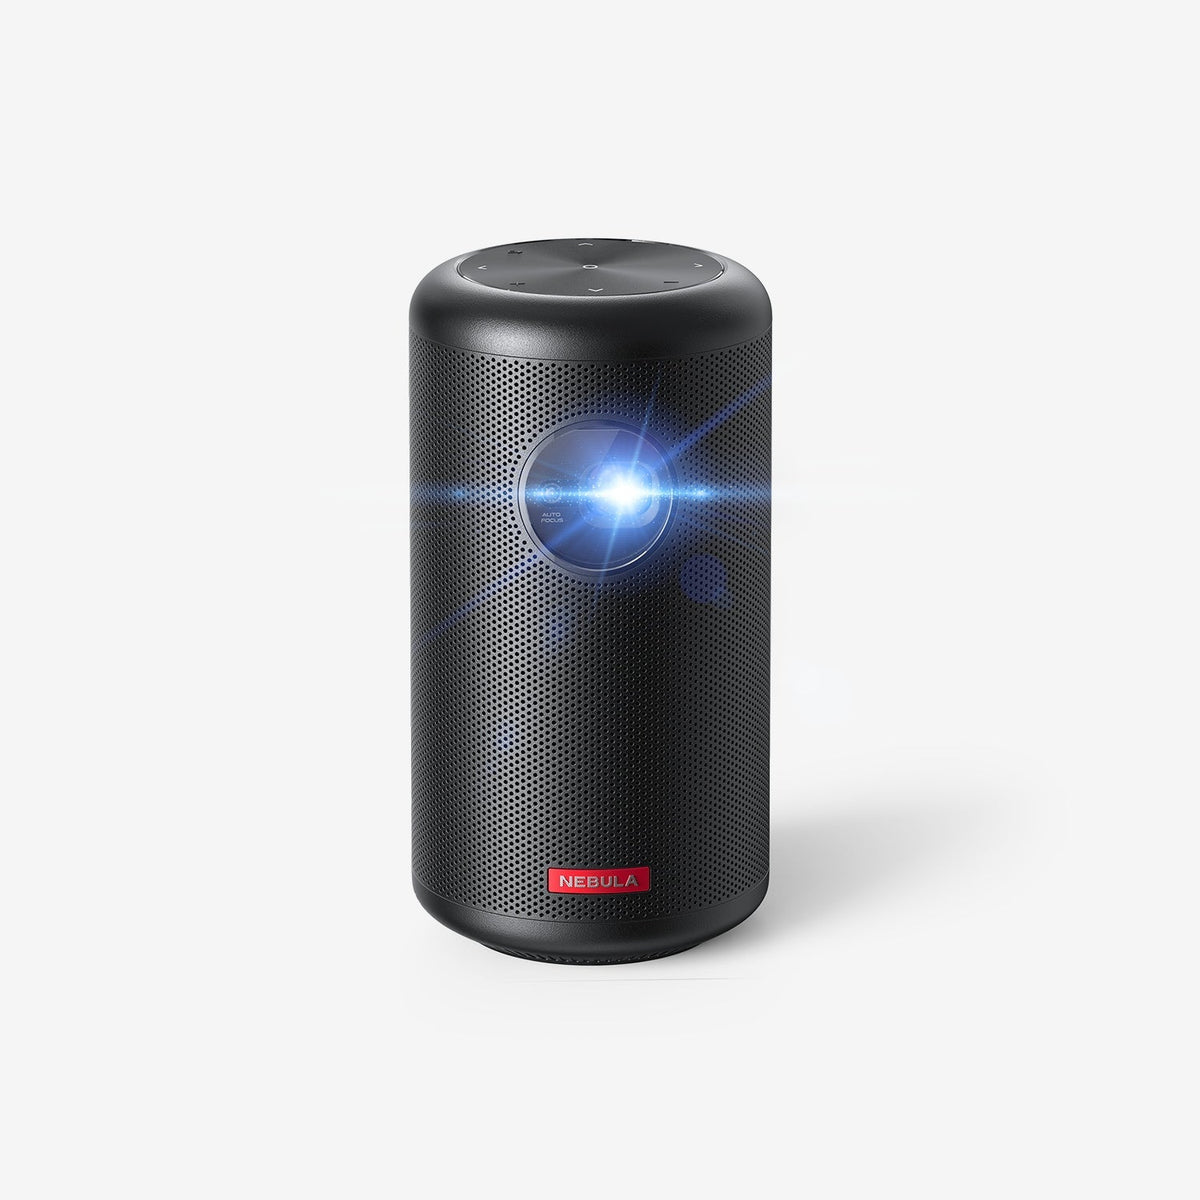 A Nebula Capsule Max portable projector sits in a white room projecting a blue light toward the camera.